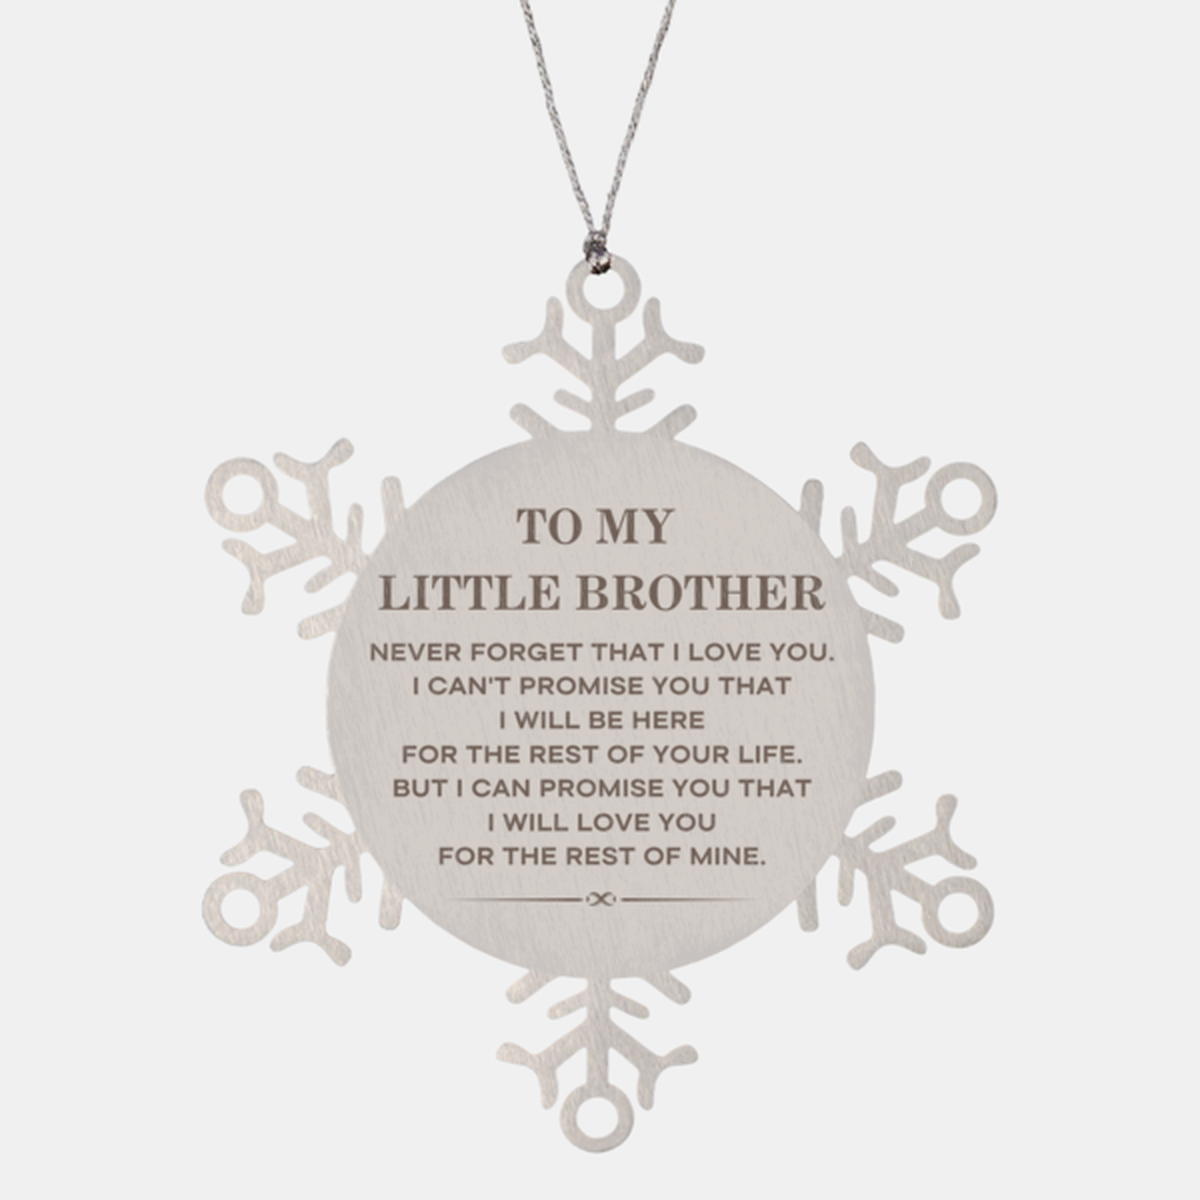 To My Little Brother Gifts, I will love you for the rest of mine, Love Little Brother Ornament, Birthday Christmas Unique Snowflake Ornament For Little Brother